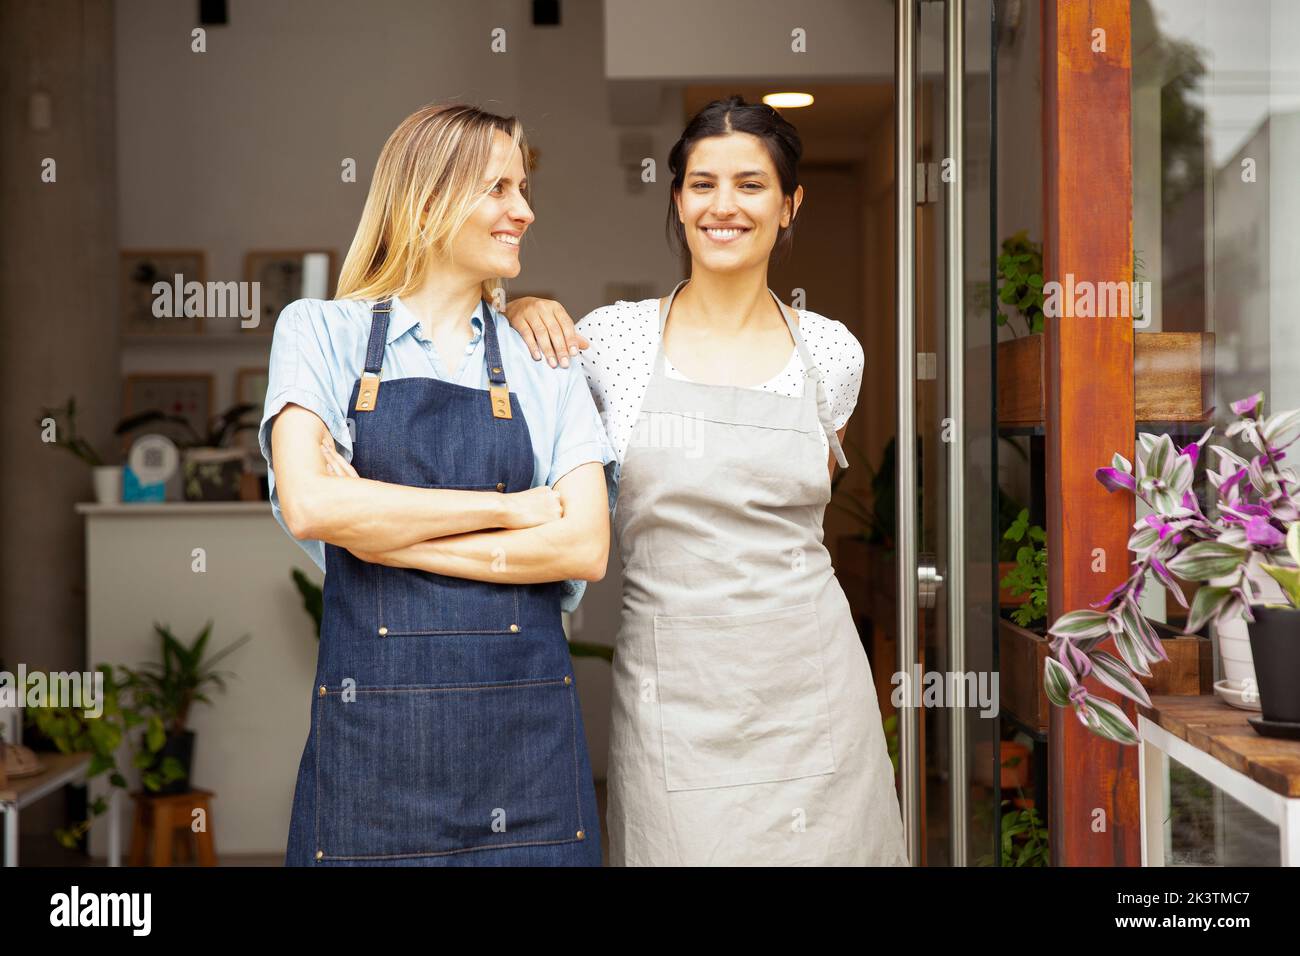 Small business flower shop owners standing with arms crossed Stock Photo